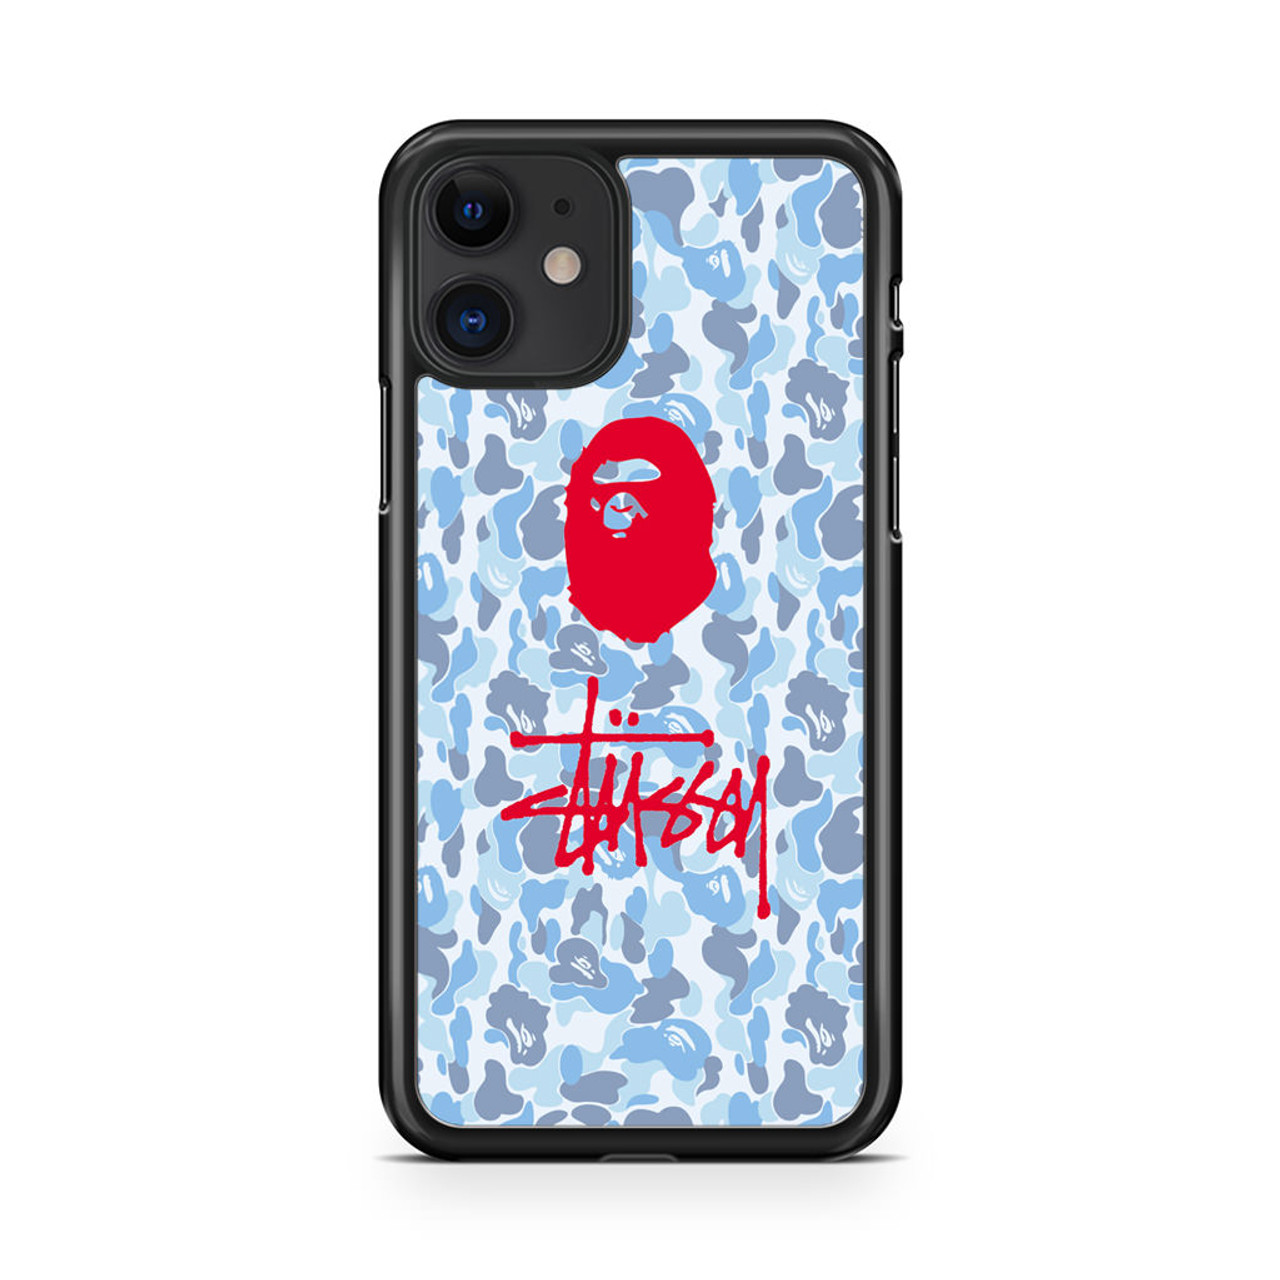 SUPREME STUSSY HYPEBEAST iPhone 14 Case Cover